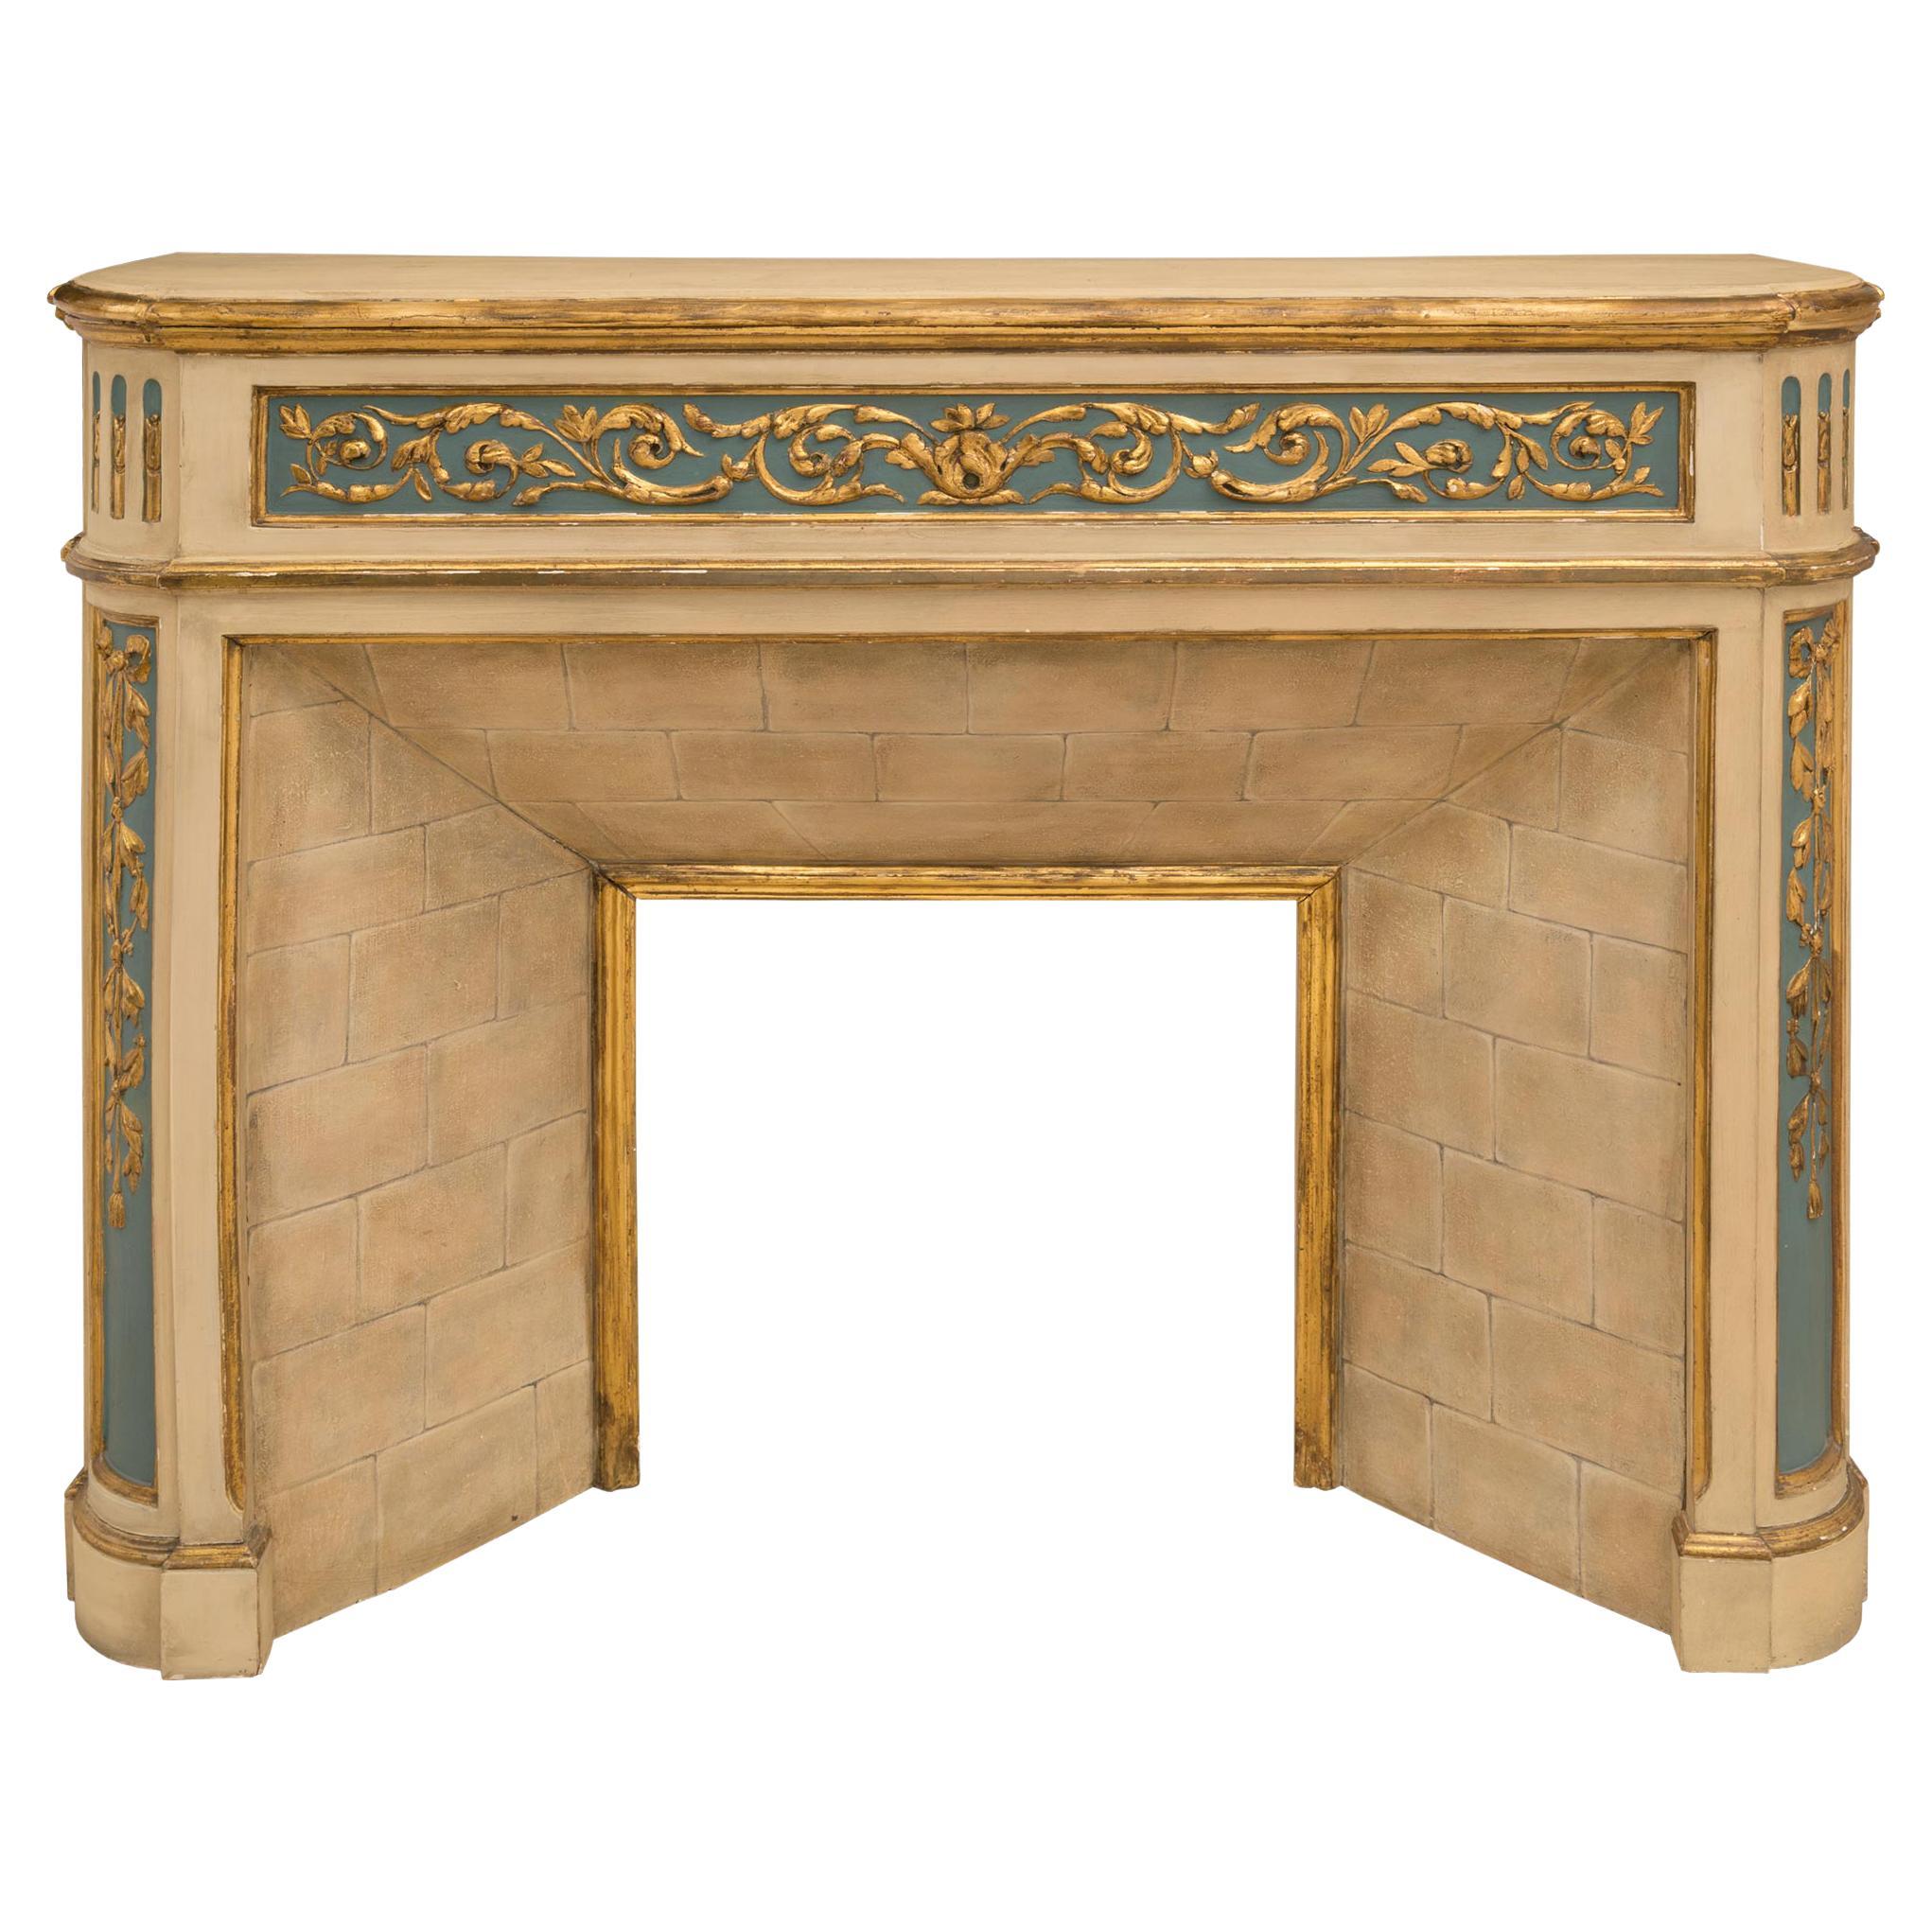 French Mid-19th Century Louis XVI Style Patinated and Giltwood Fireplace Mantel